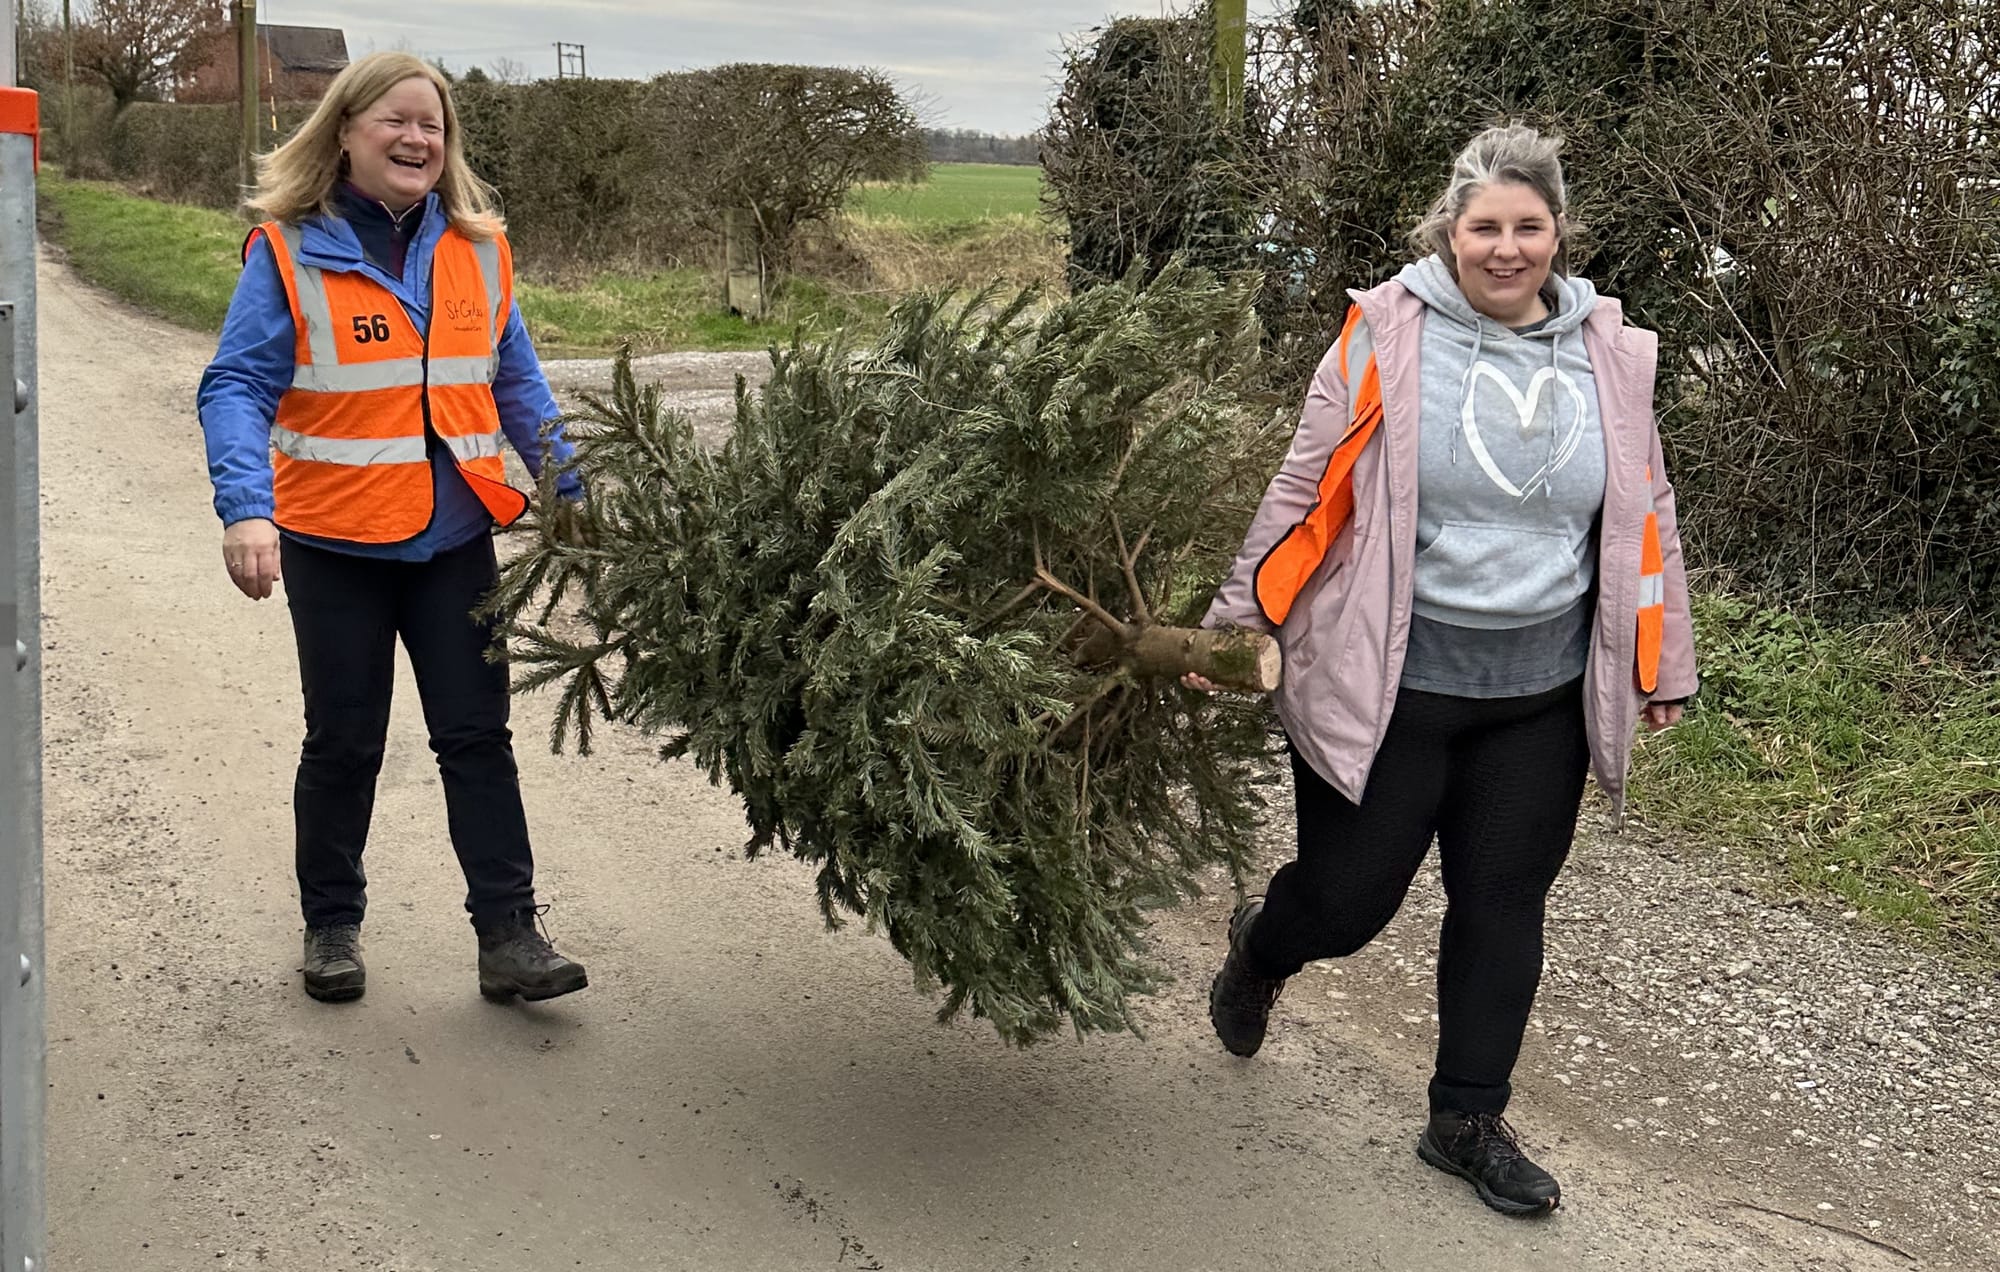 Colleagues support St Giles Hospice at their annual Tree Collecting event